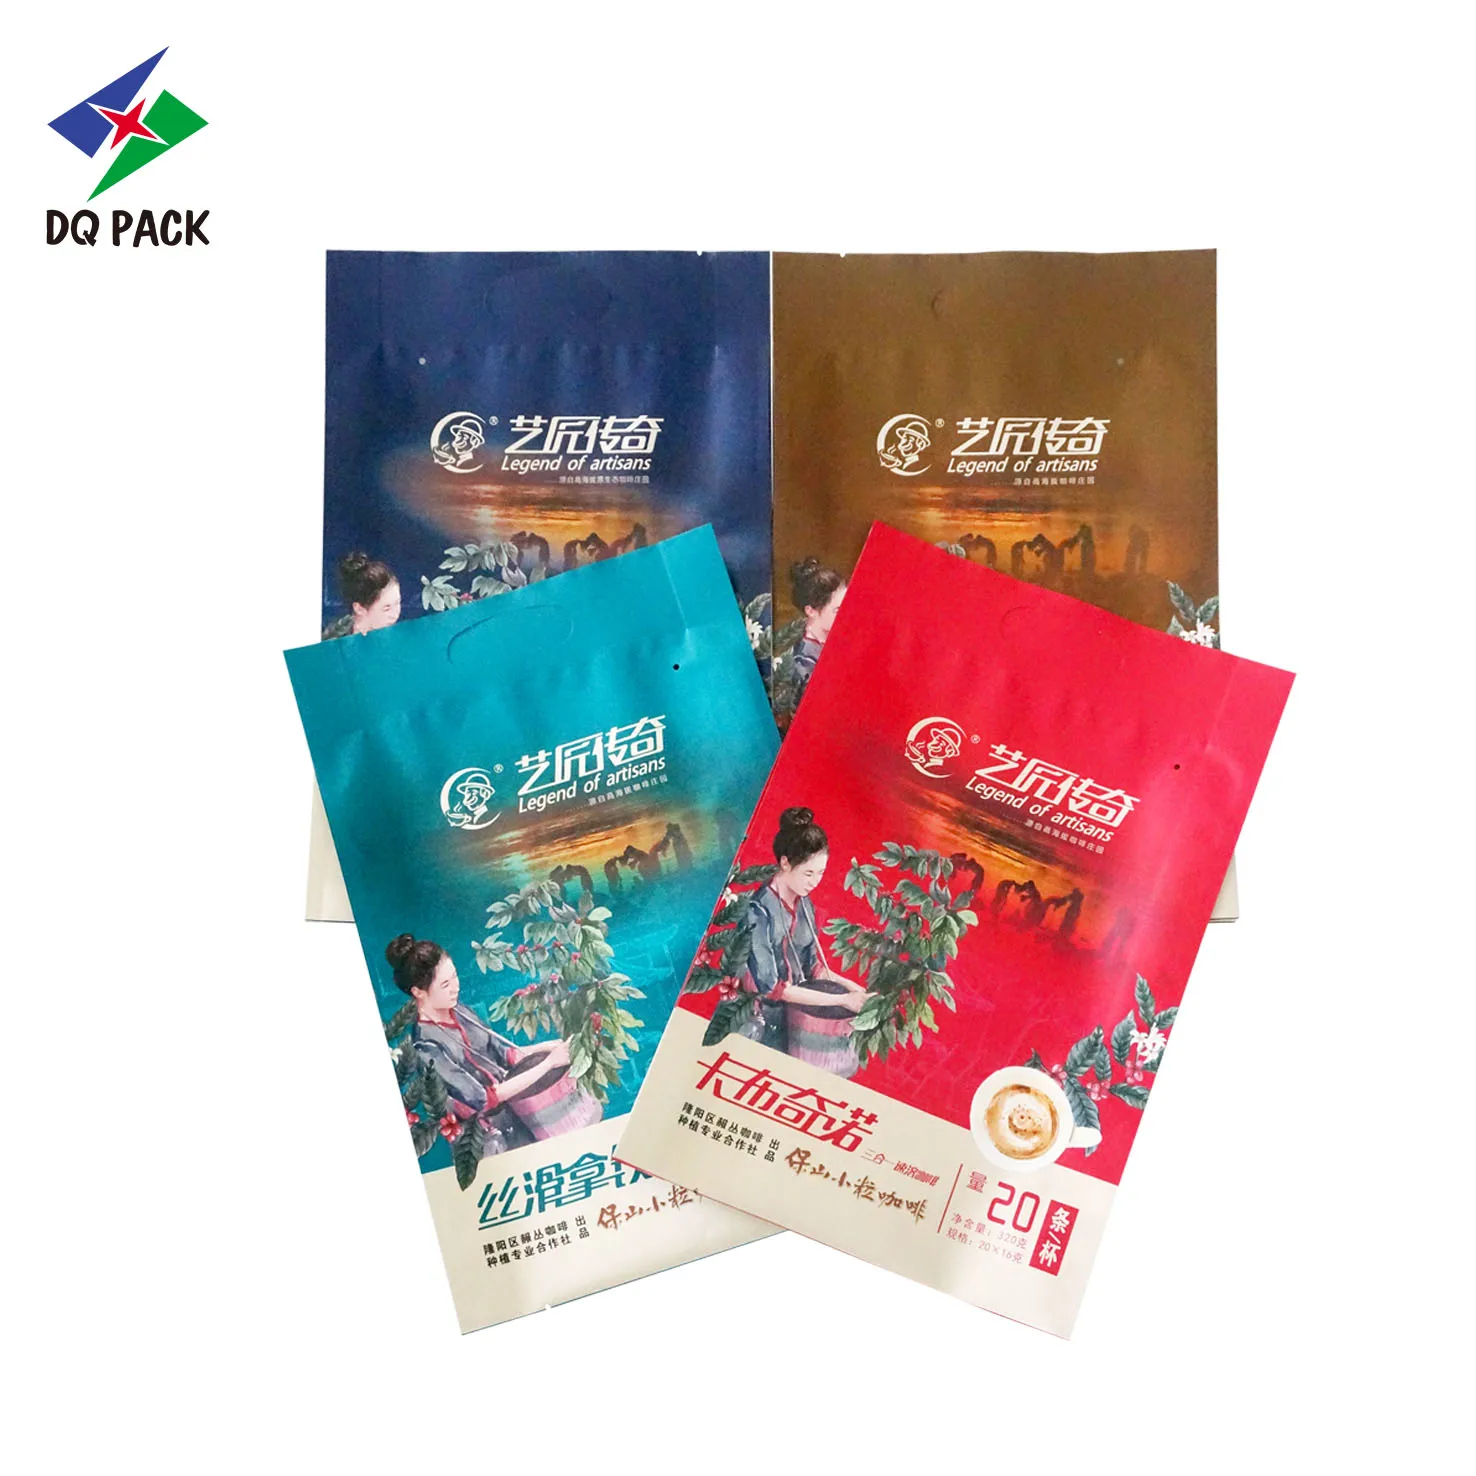 DQ PACK Free samples Flexible packaging Aluminium with gusseted pouch for coffee